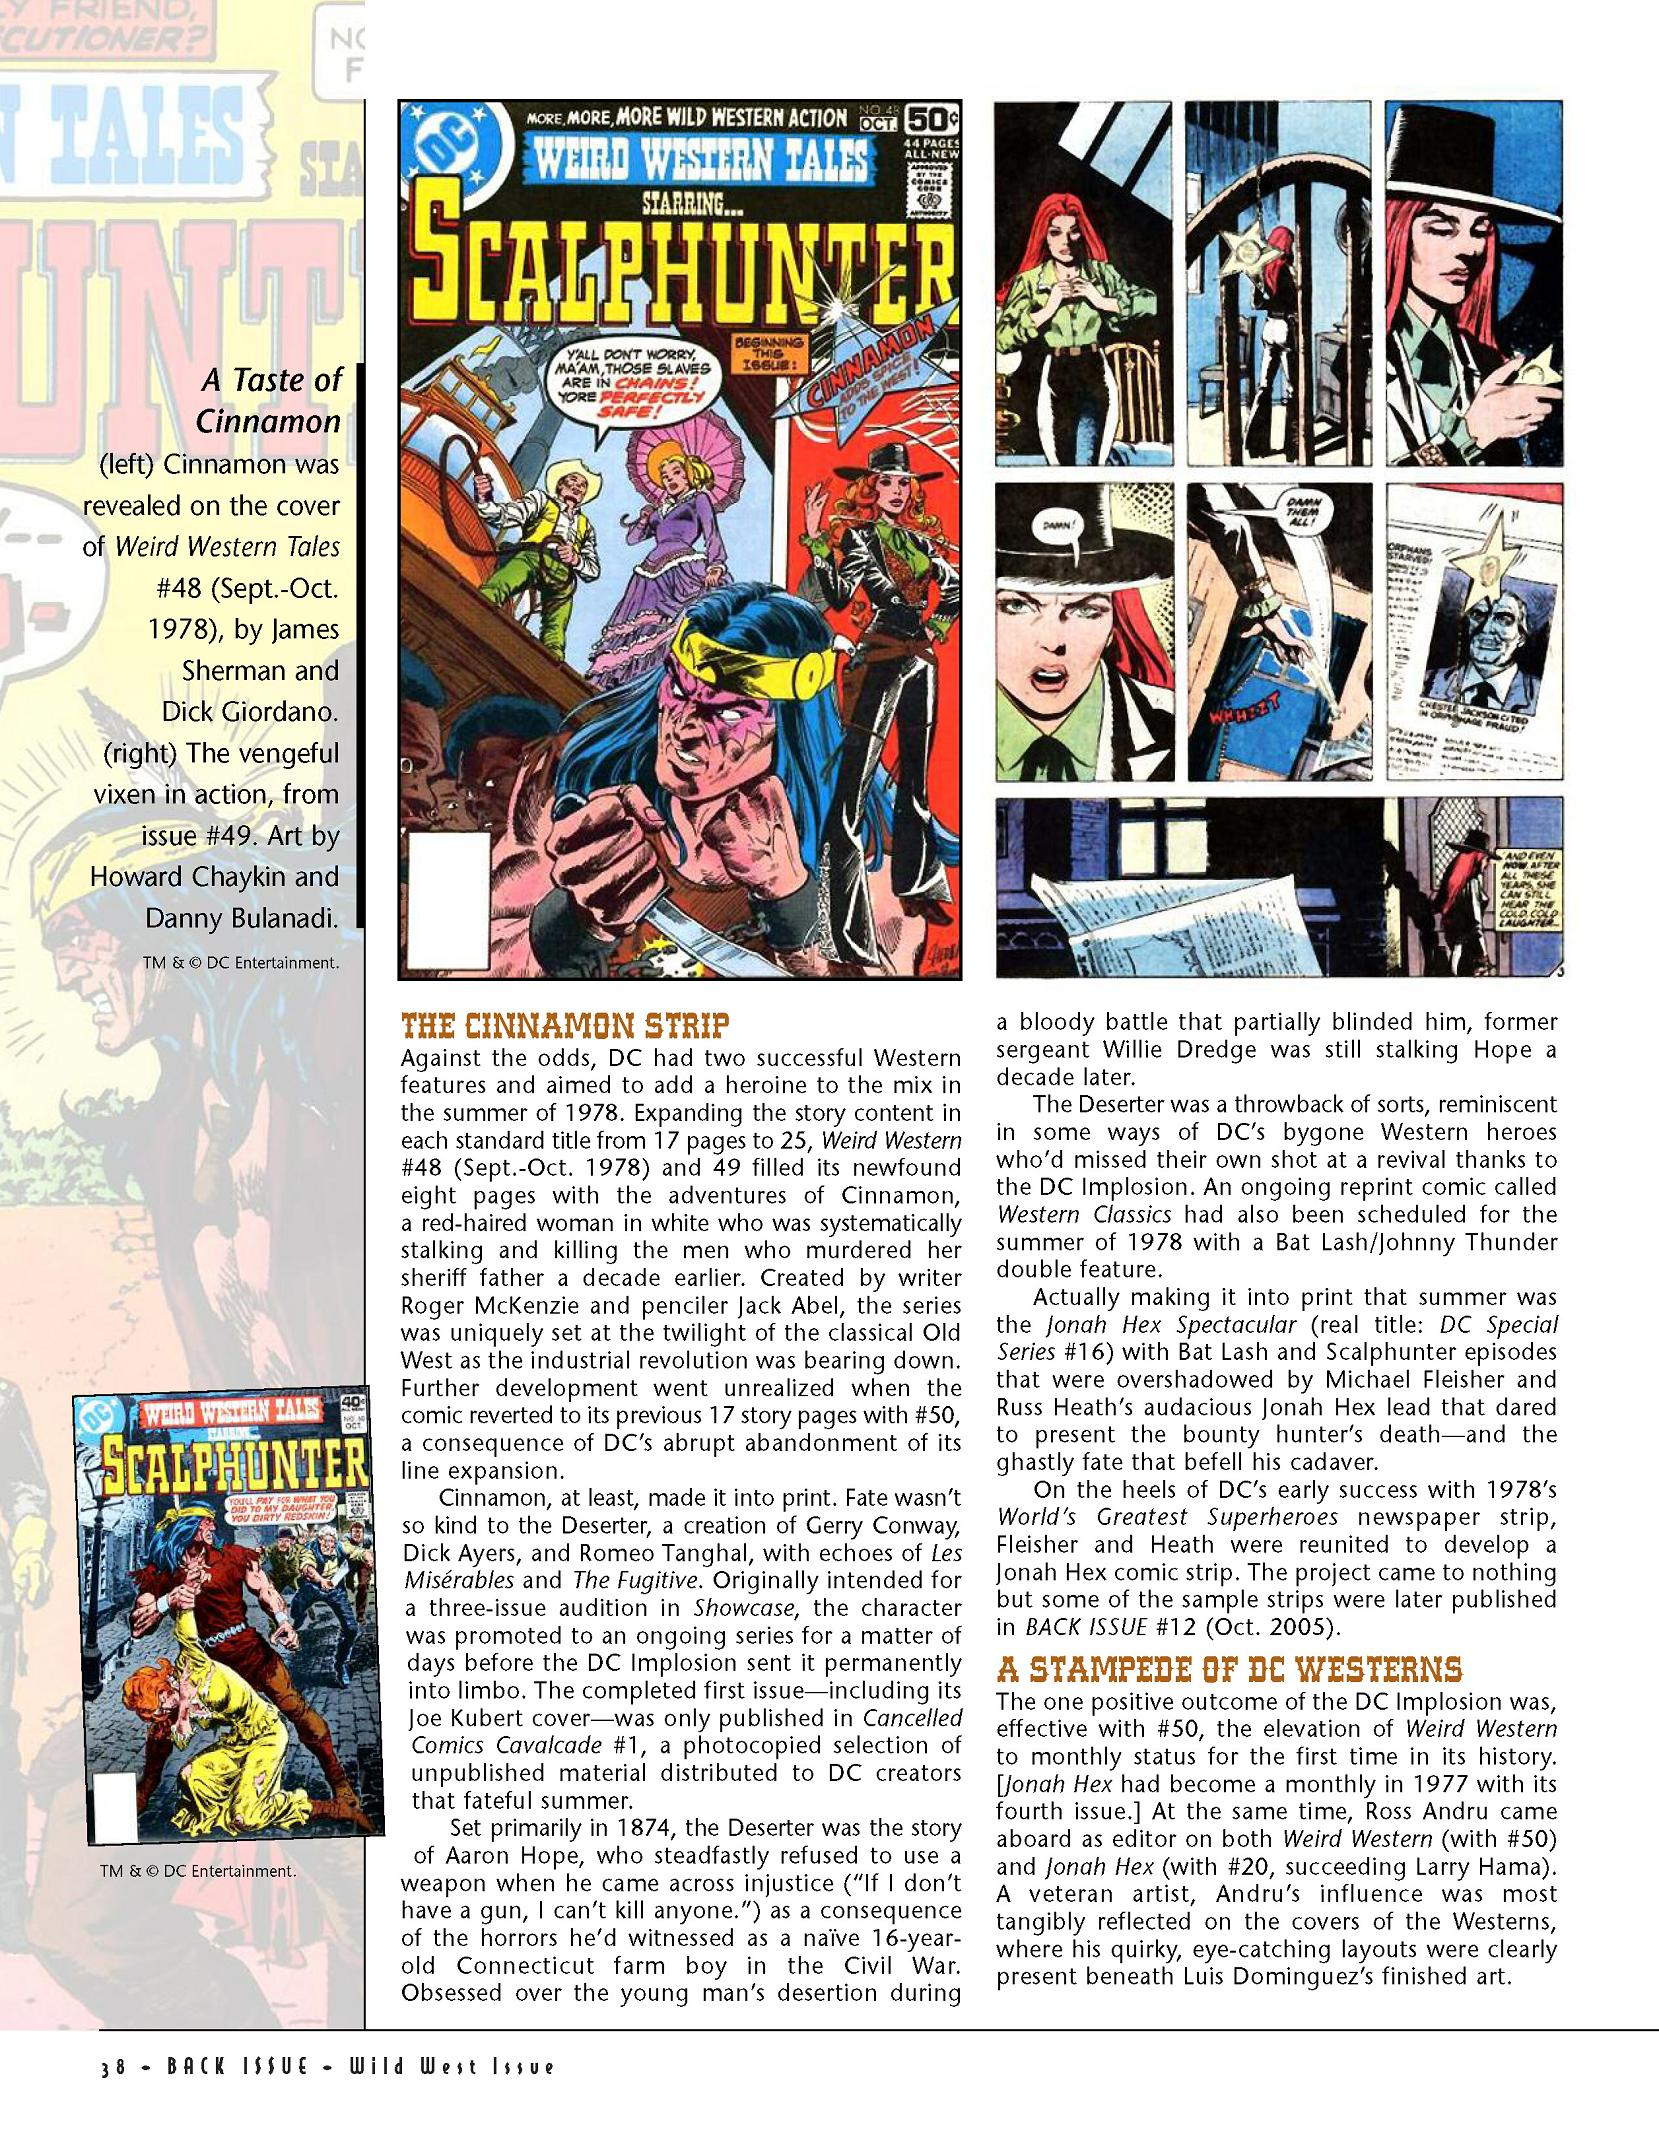 Read online Back Issue comic -  Issue #42 - 40